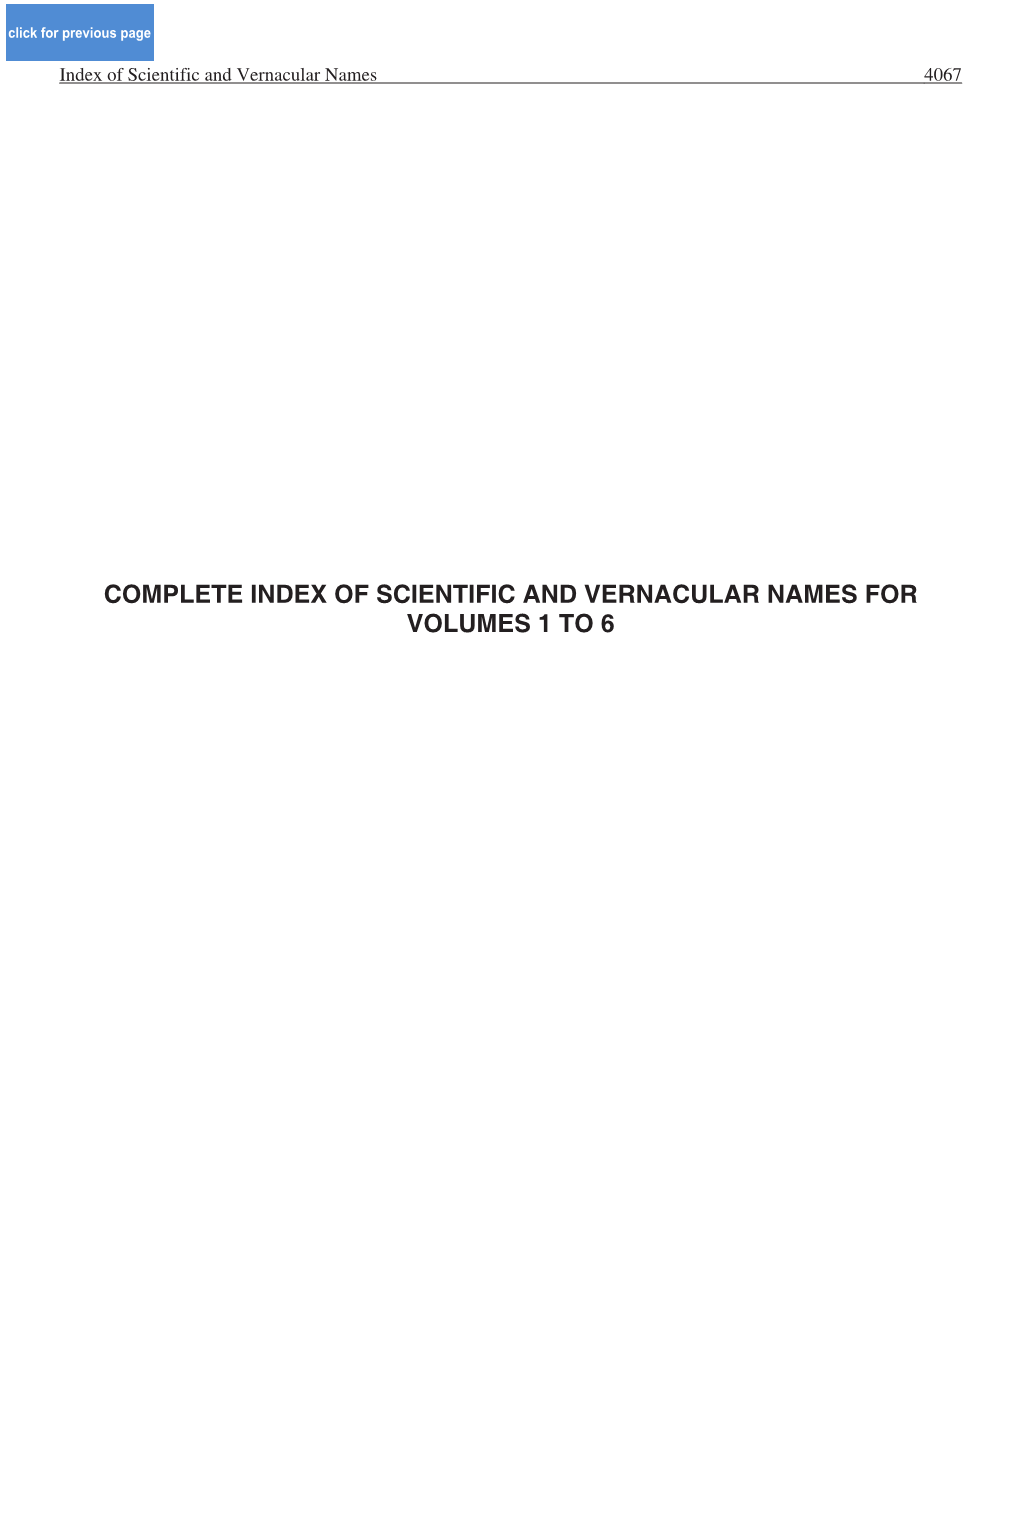 COMPLETE INDEX of SCIENTIFIC and VERNACULAR NAMES for VOLUMES 1 to 6 4068 the Living Marine Resources of the Western Central Pacific